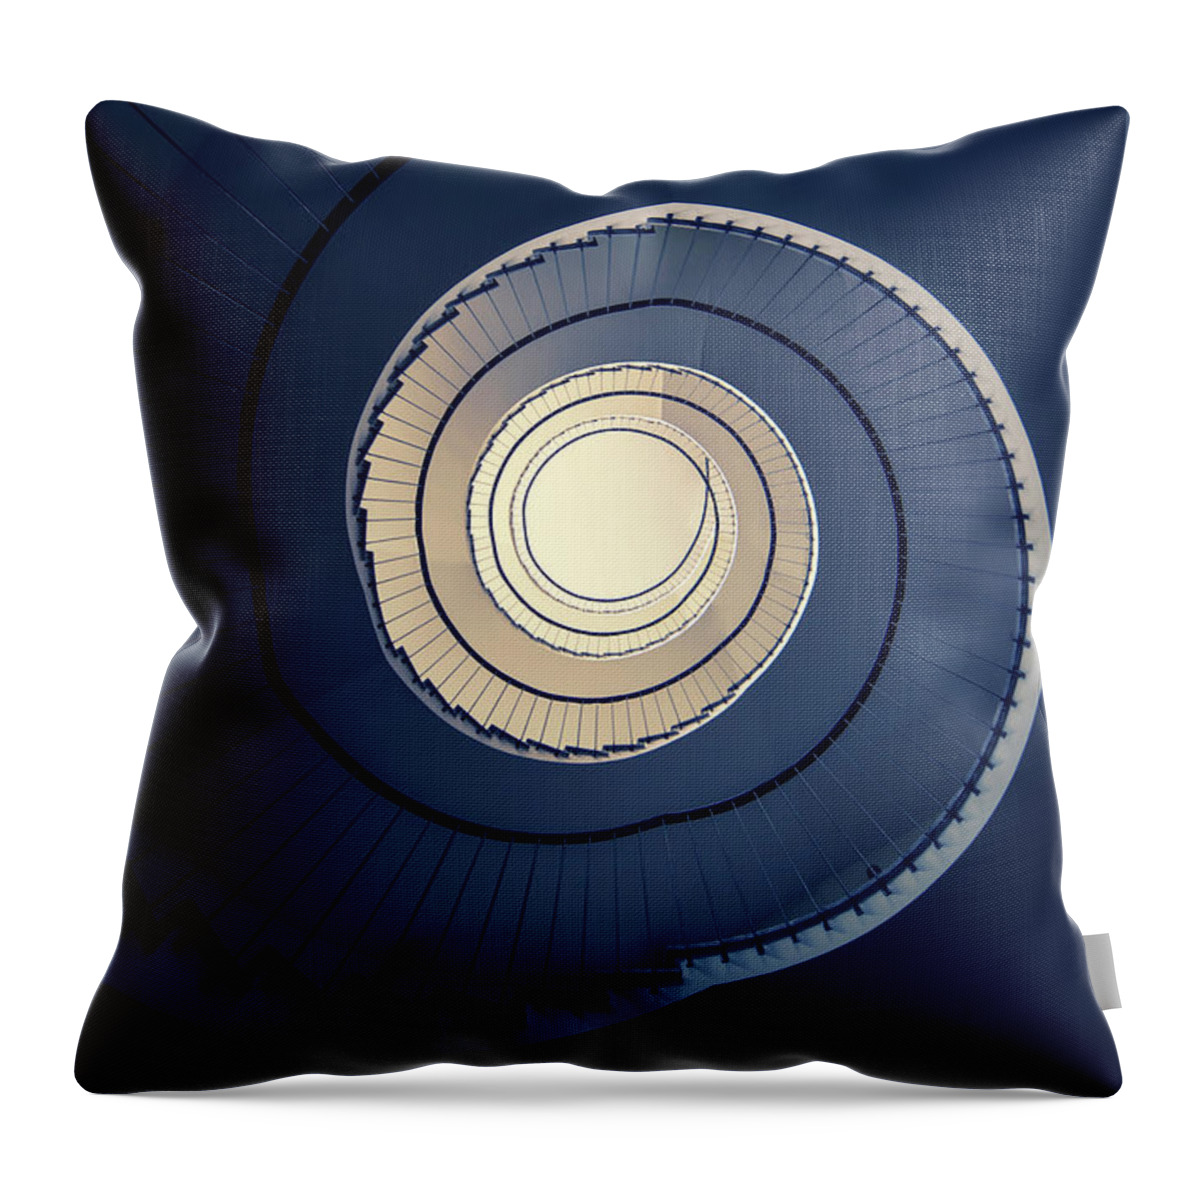 Spiral Staircase Throw Pillow featuring the photograph Spiral staircase in blue and cream tones by Jaroslaw Blaminsky